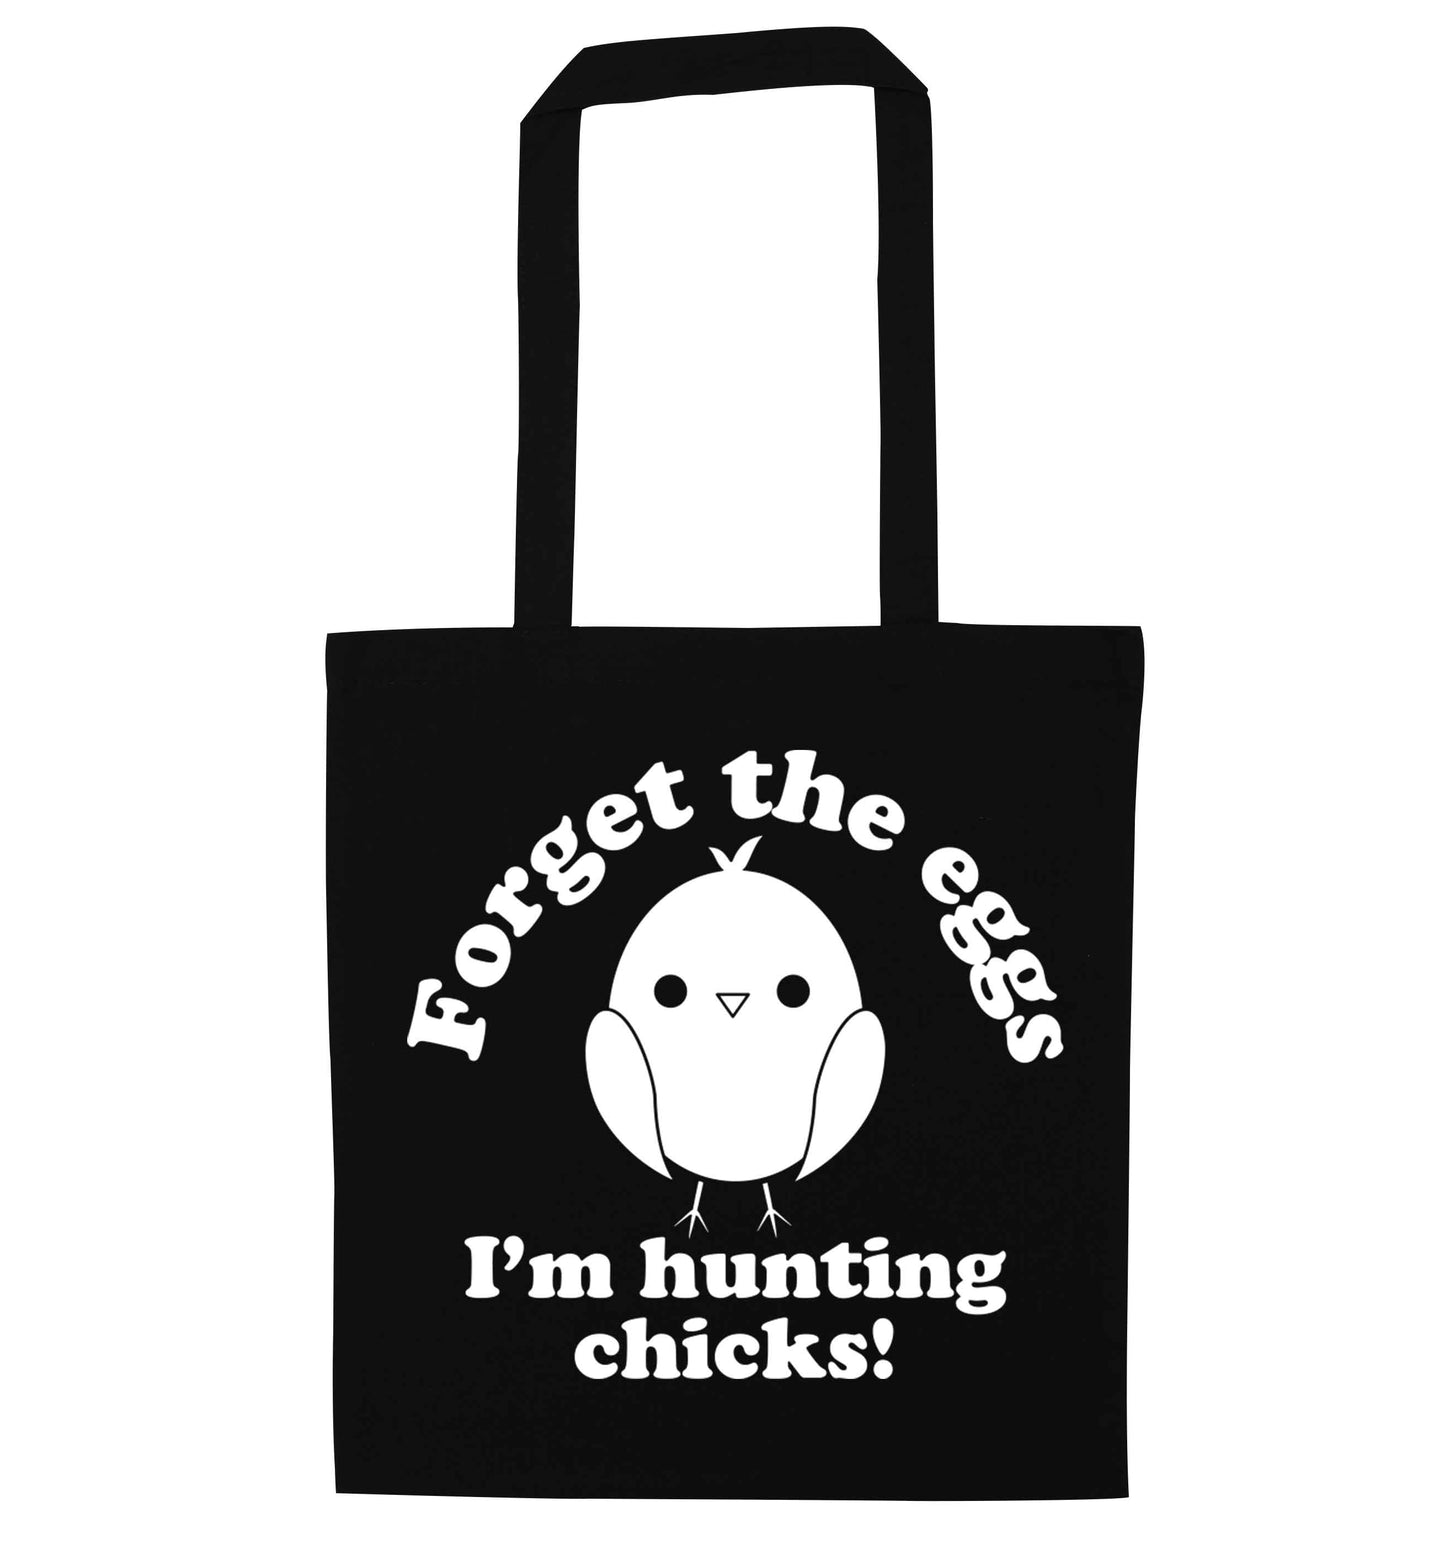 Forget the eggs I'm hunting chicks! black tote bag